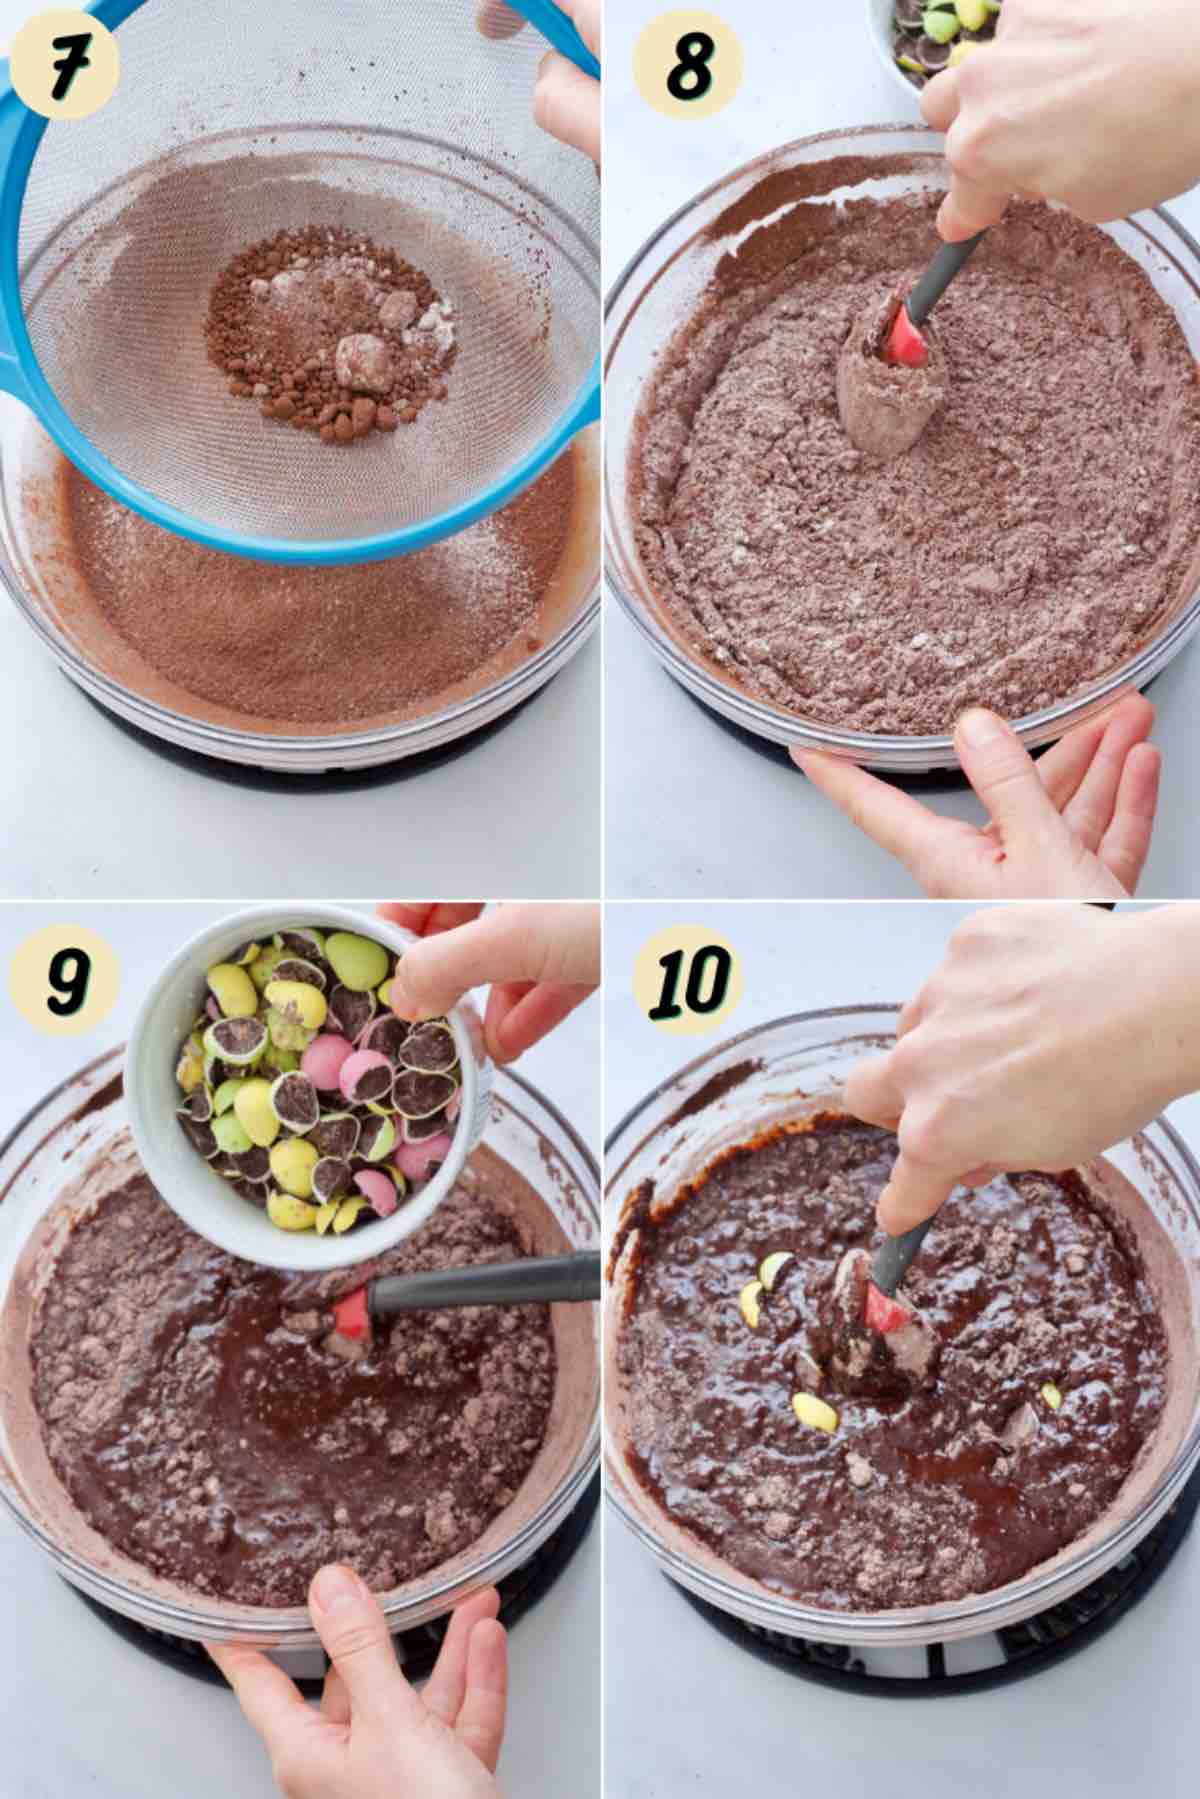 Mixing brownie batter.